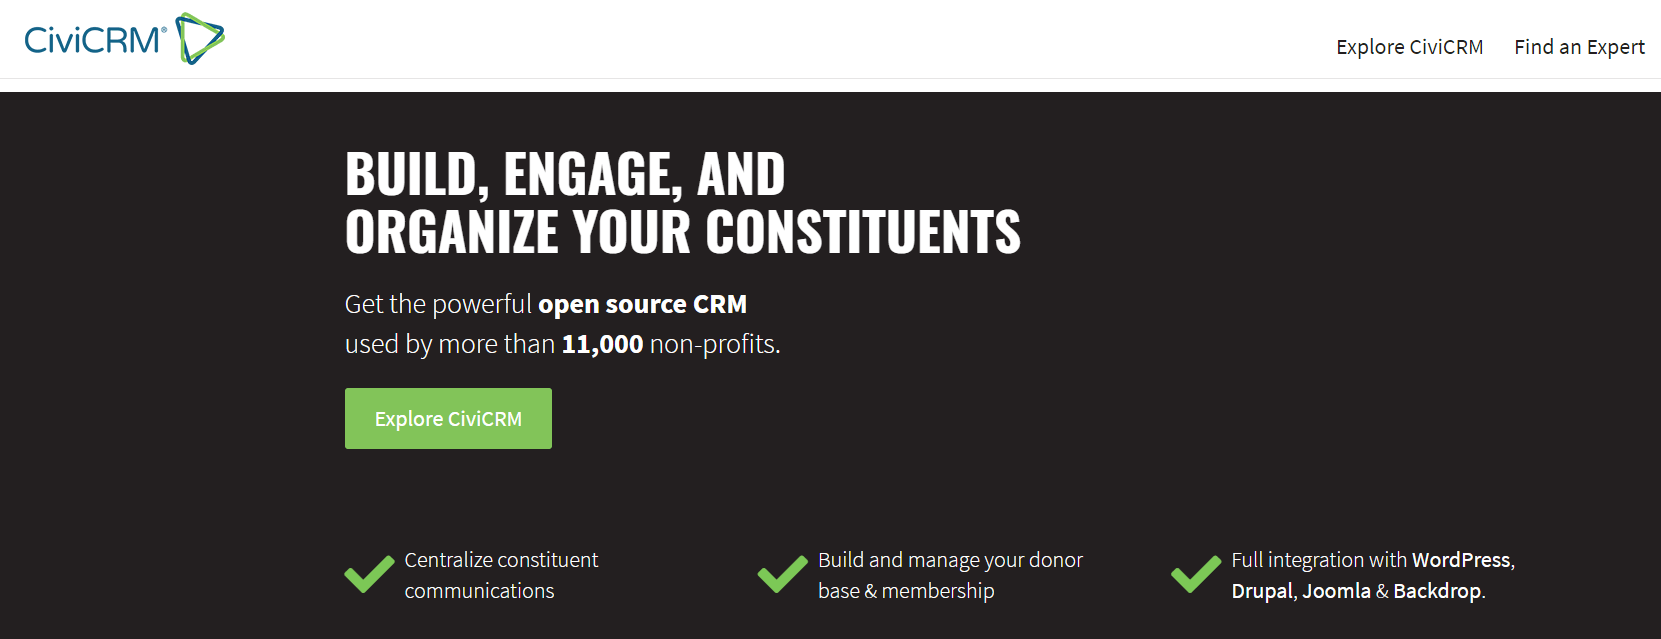 CiviCRM - Best CRM Tool For Small Business